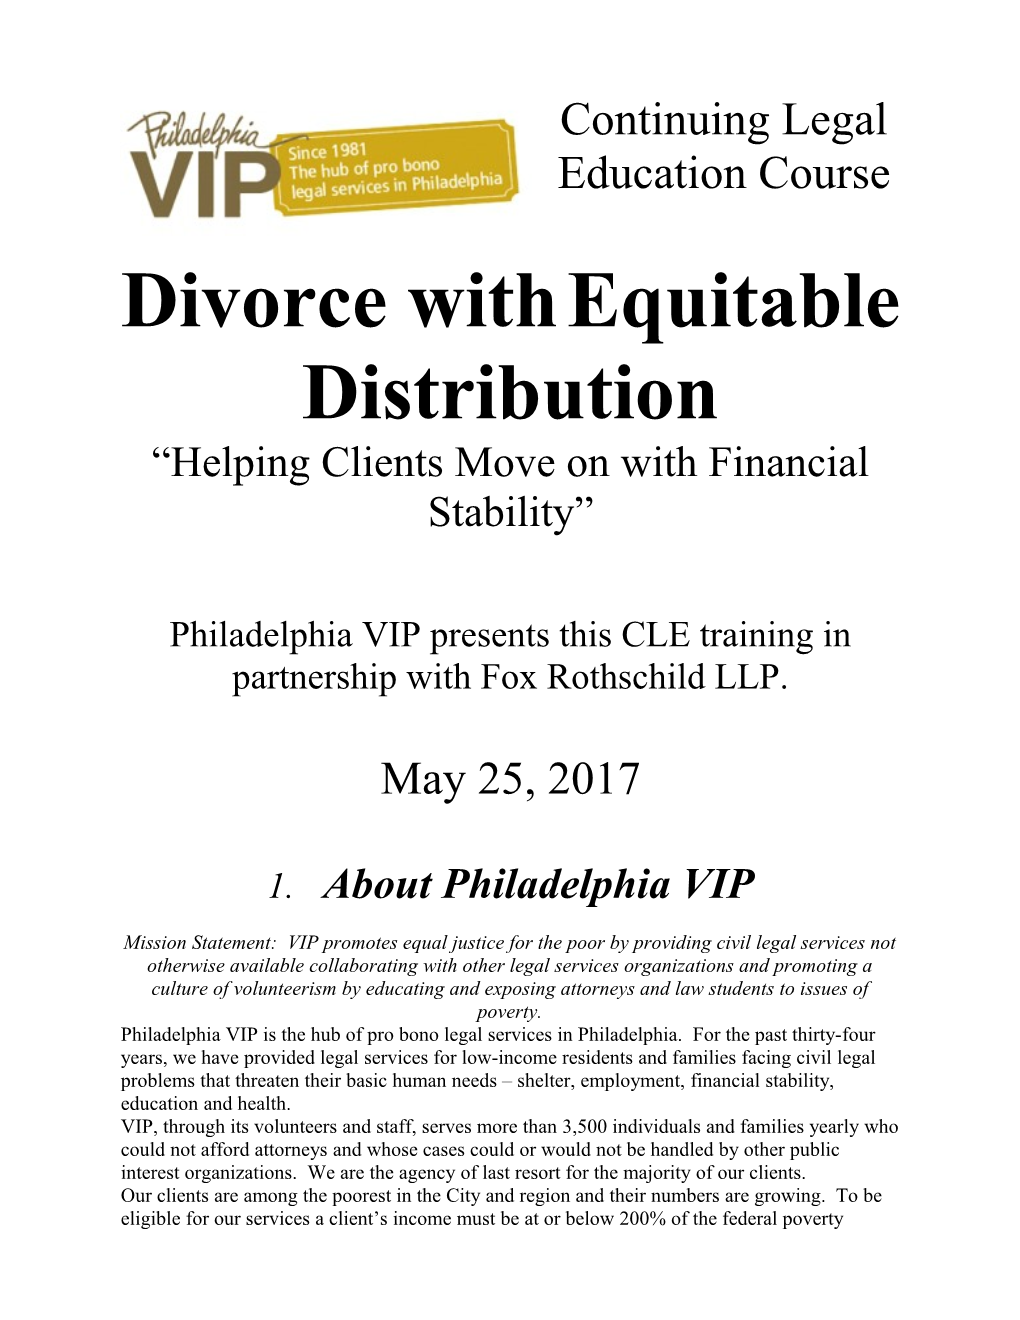 Philadelphia VIP Presents This CLE Training in Partnership with Fox Rothschild LLP